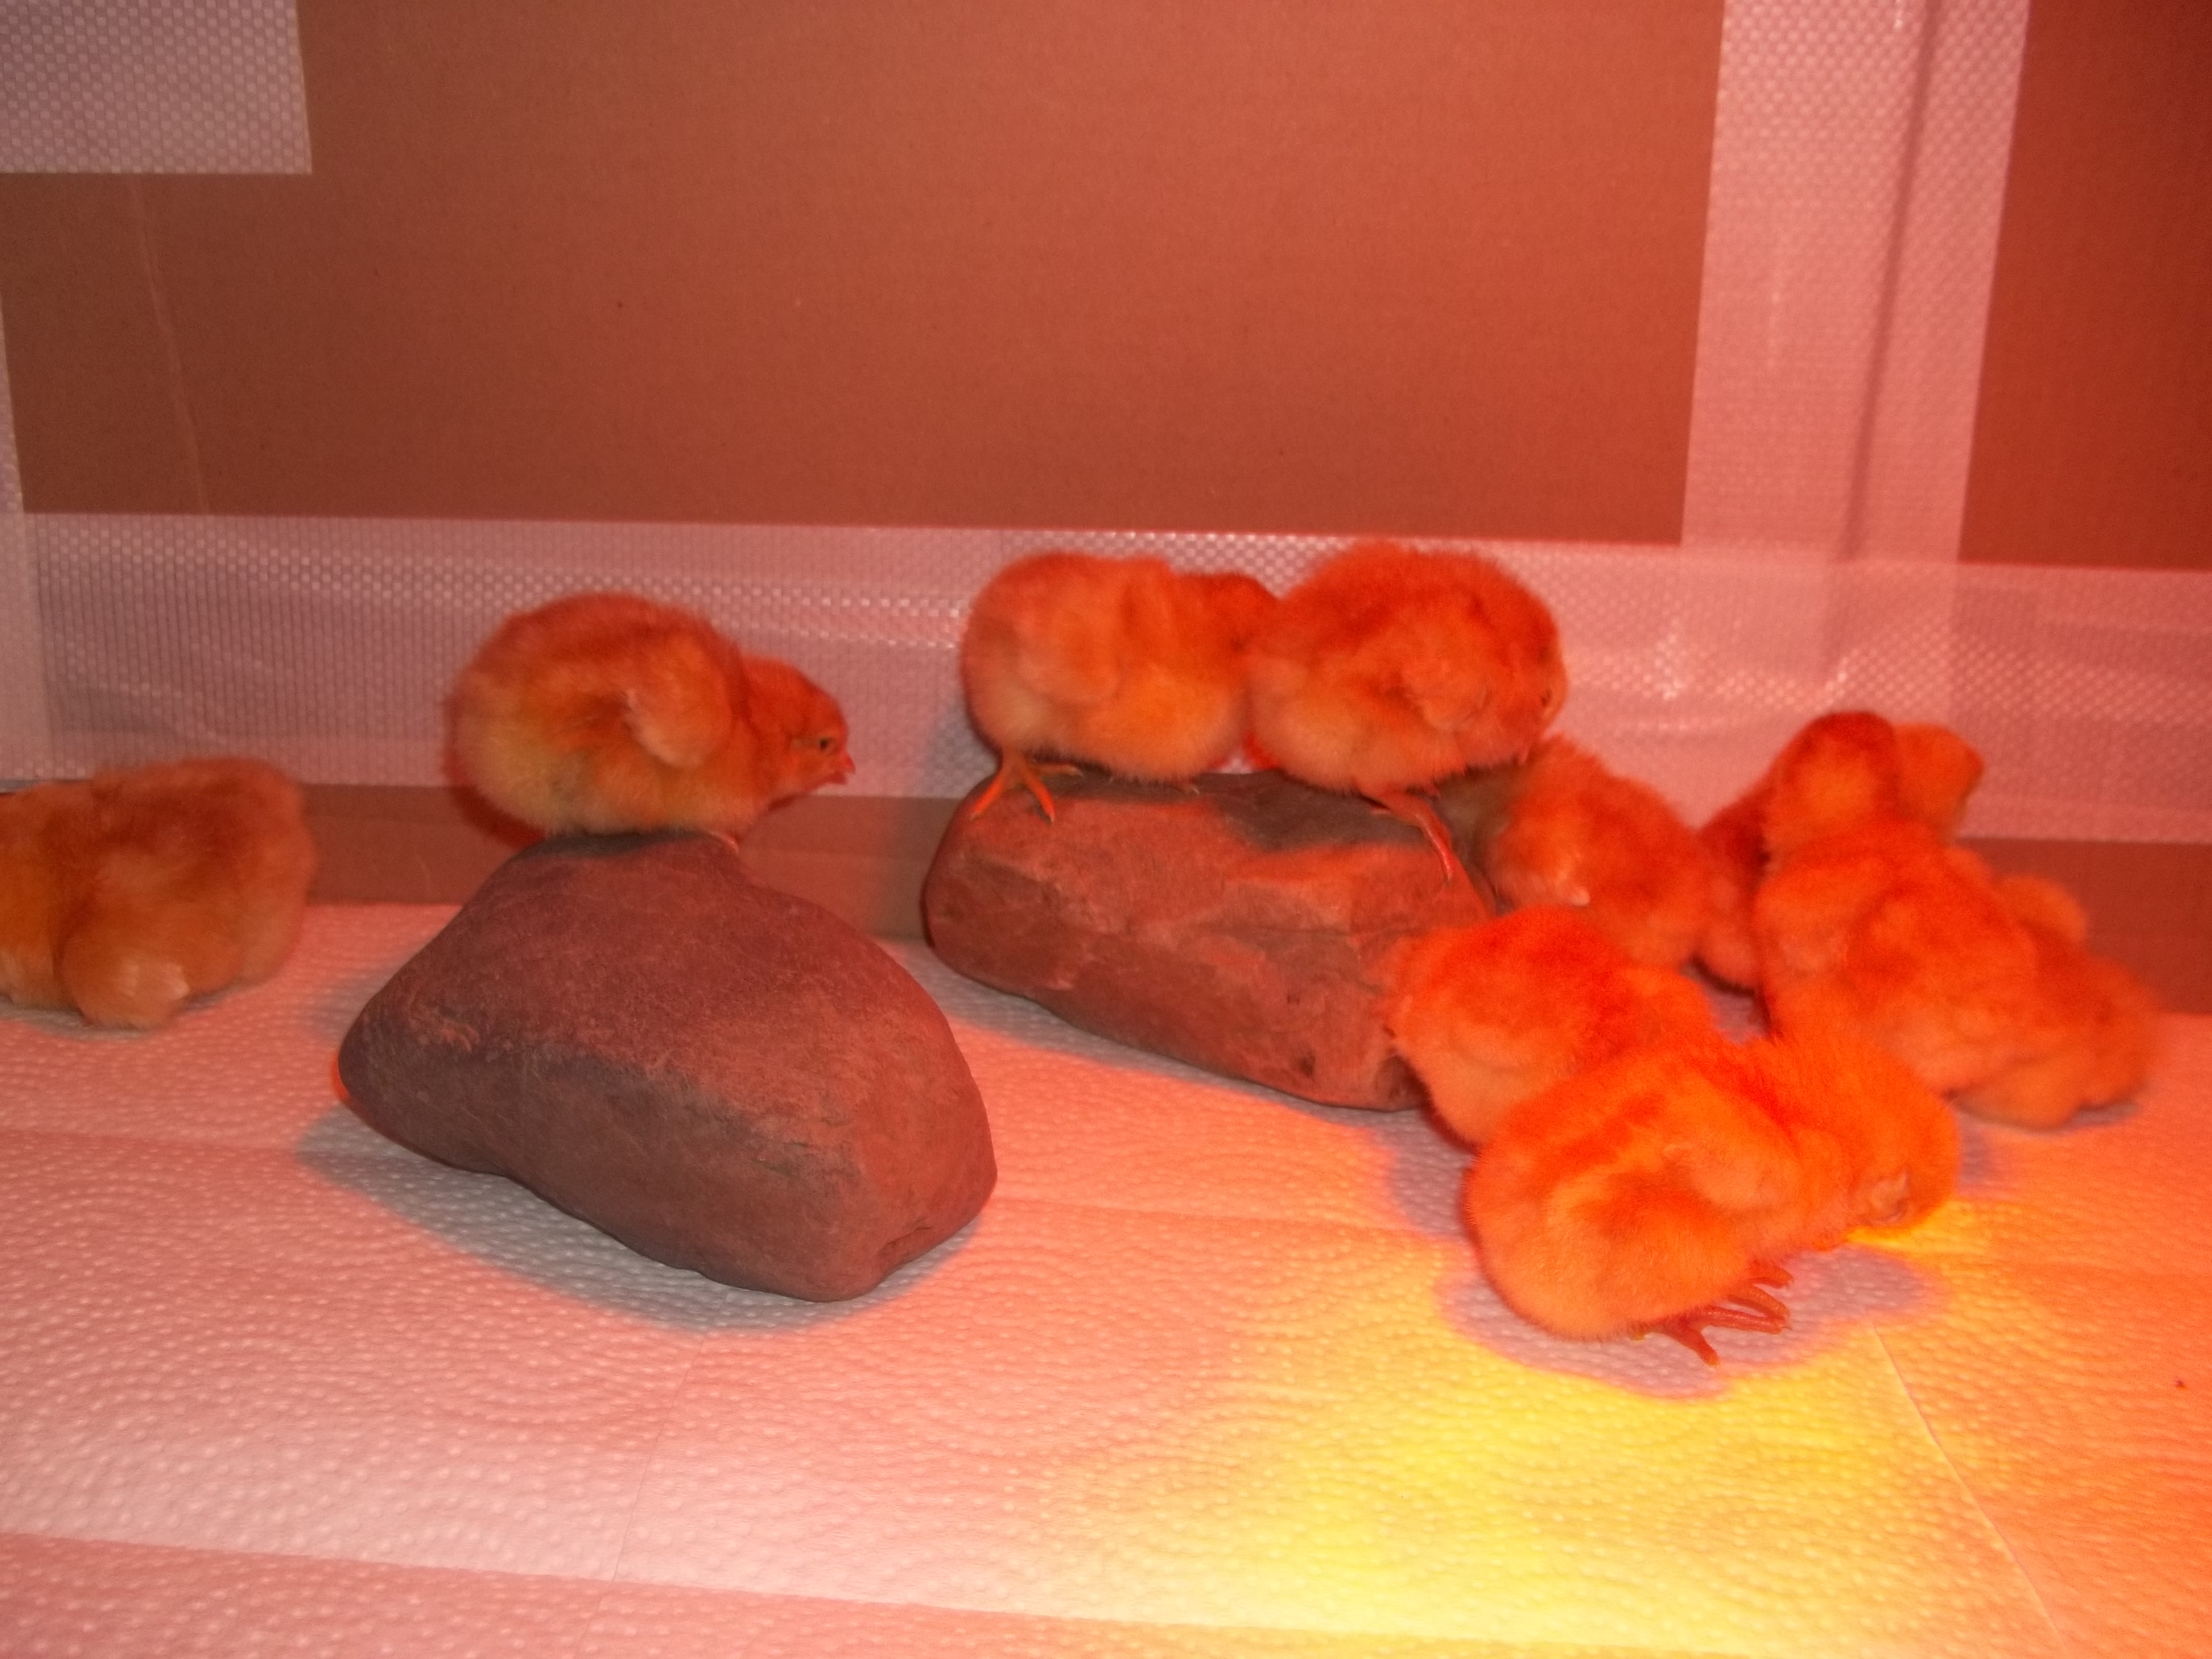 They love their rocks! They actually fight over who gets to stand on them! & they will push each other off!! lol
So cute!